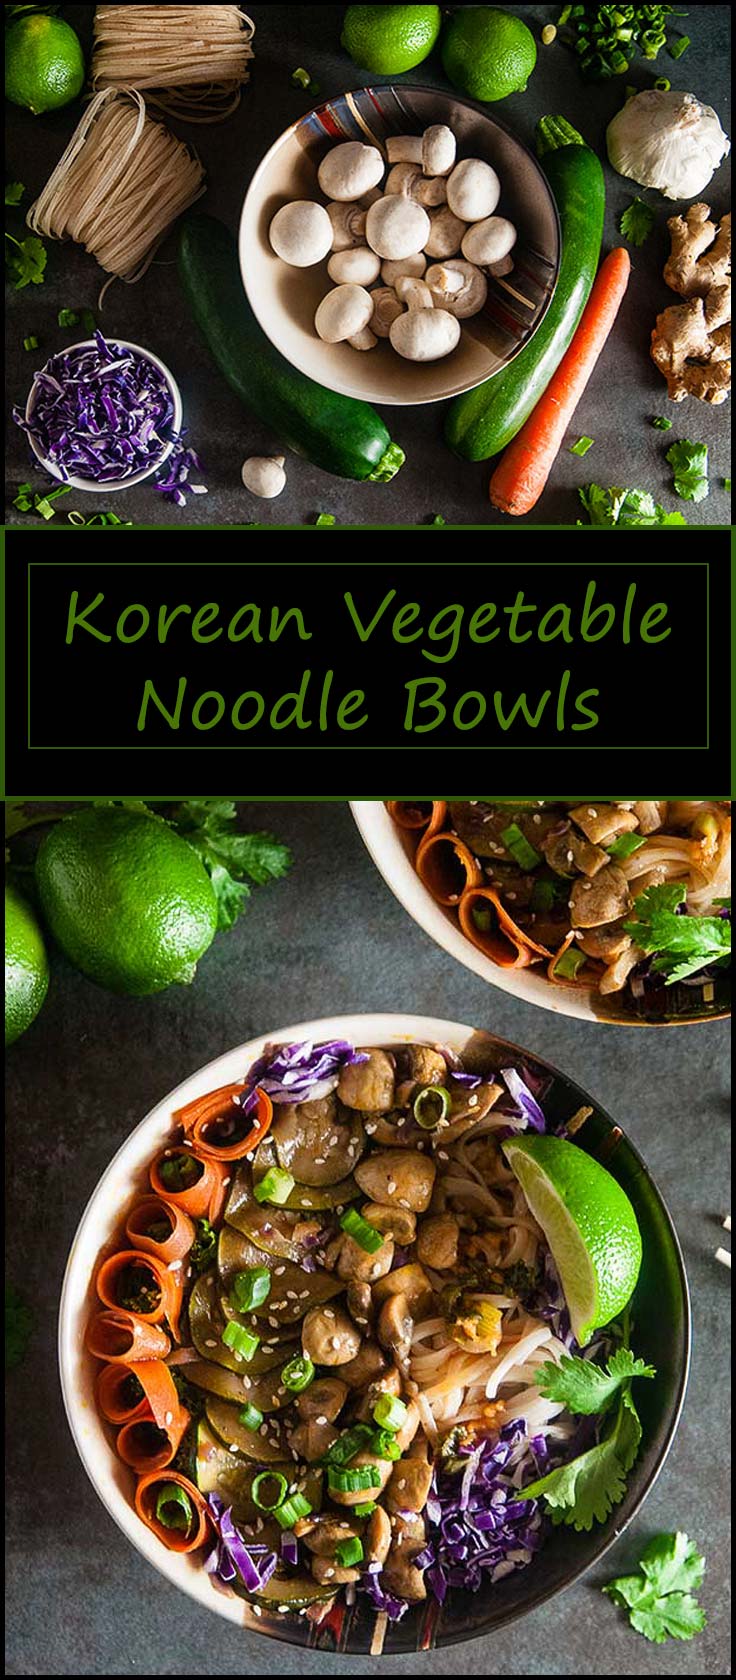 Quick Korean Vegetable Noodle Bowls inspired by bibimbap make for a vegetarian and gluten free friendly lunch or dinner that's ready in under 20 minutes from www.seasonedsprinkles.com